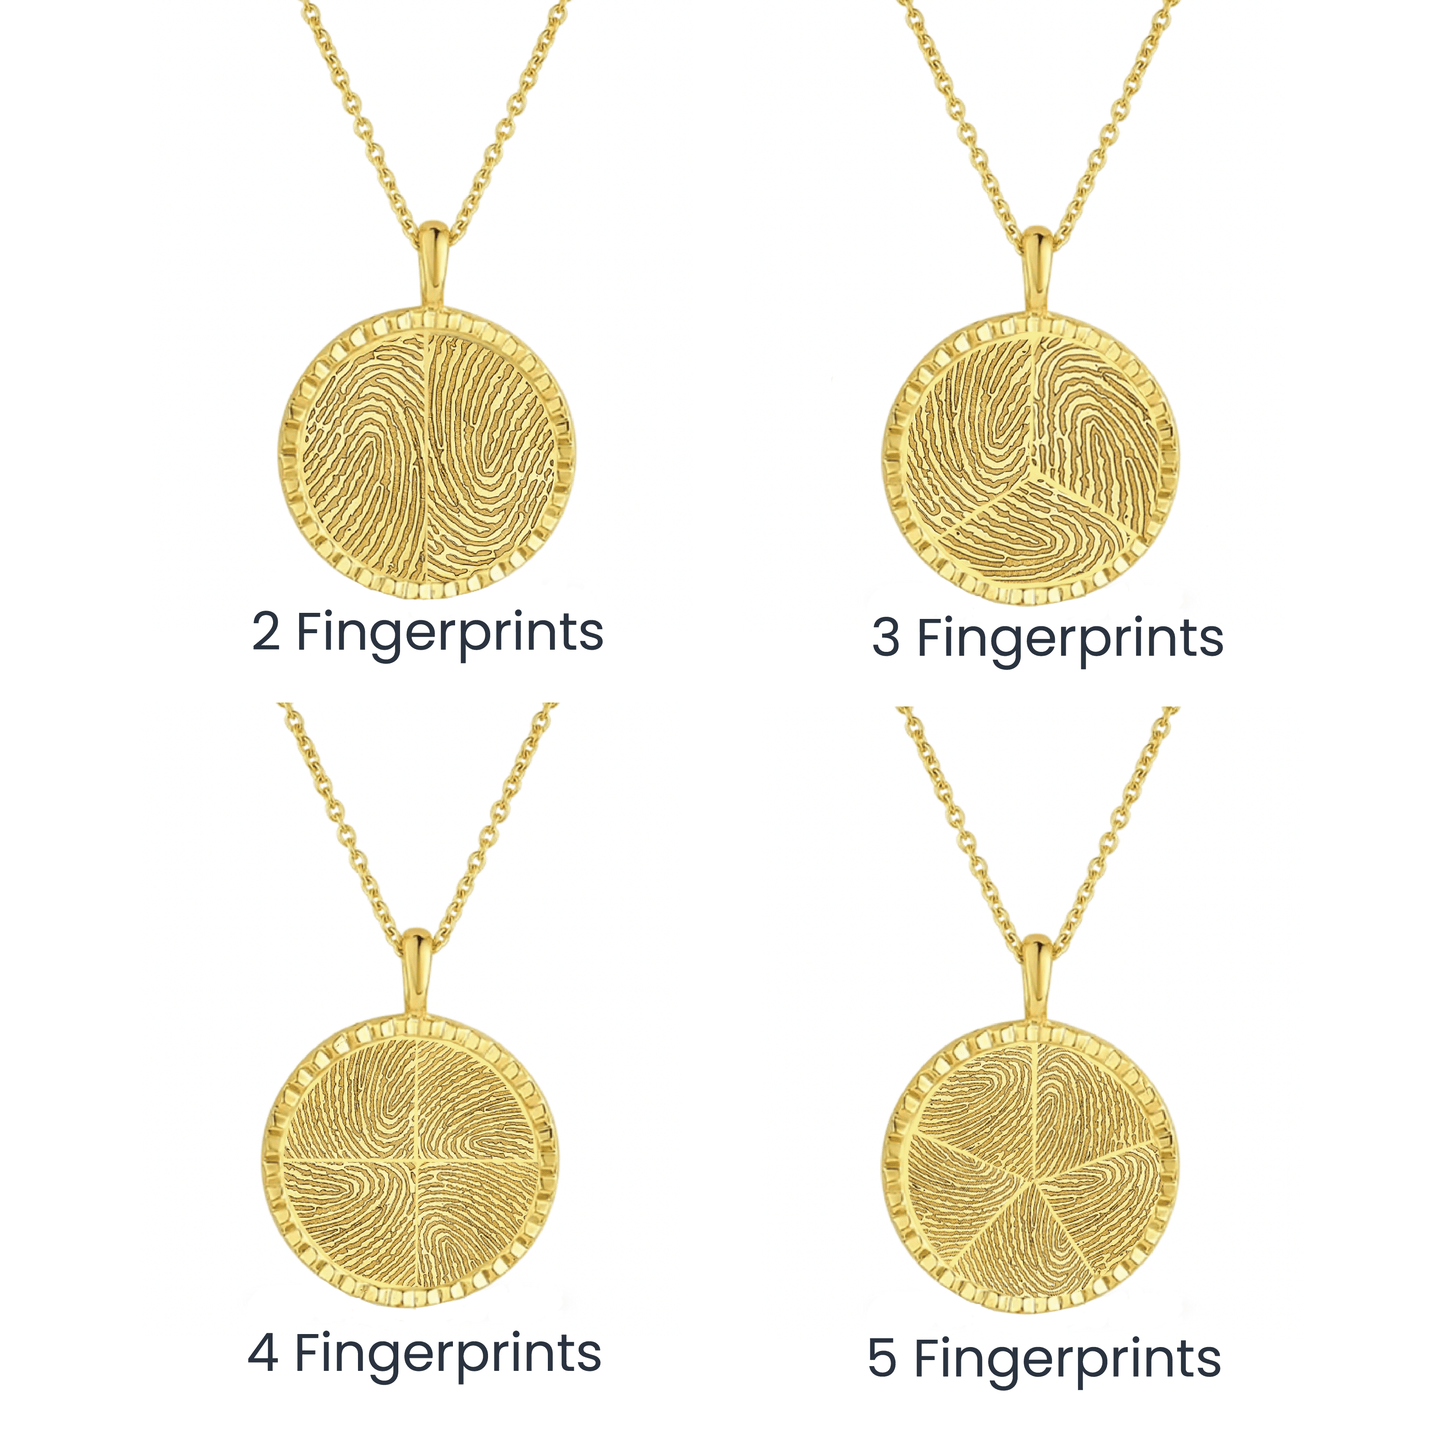 The Compass 14K Solid Gold